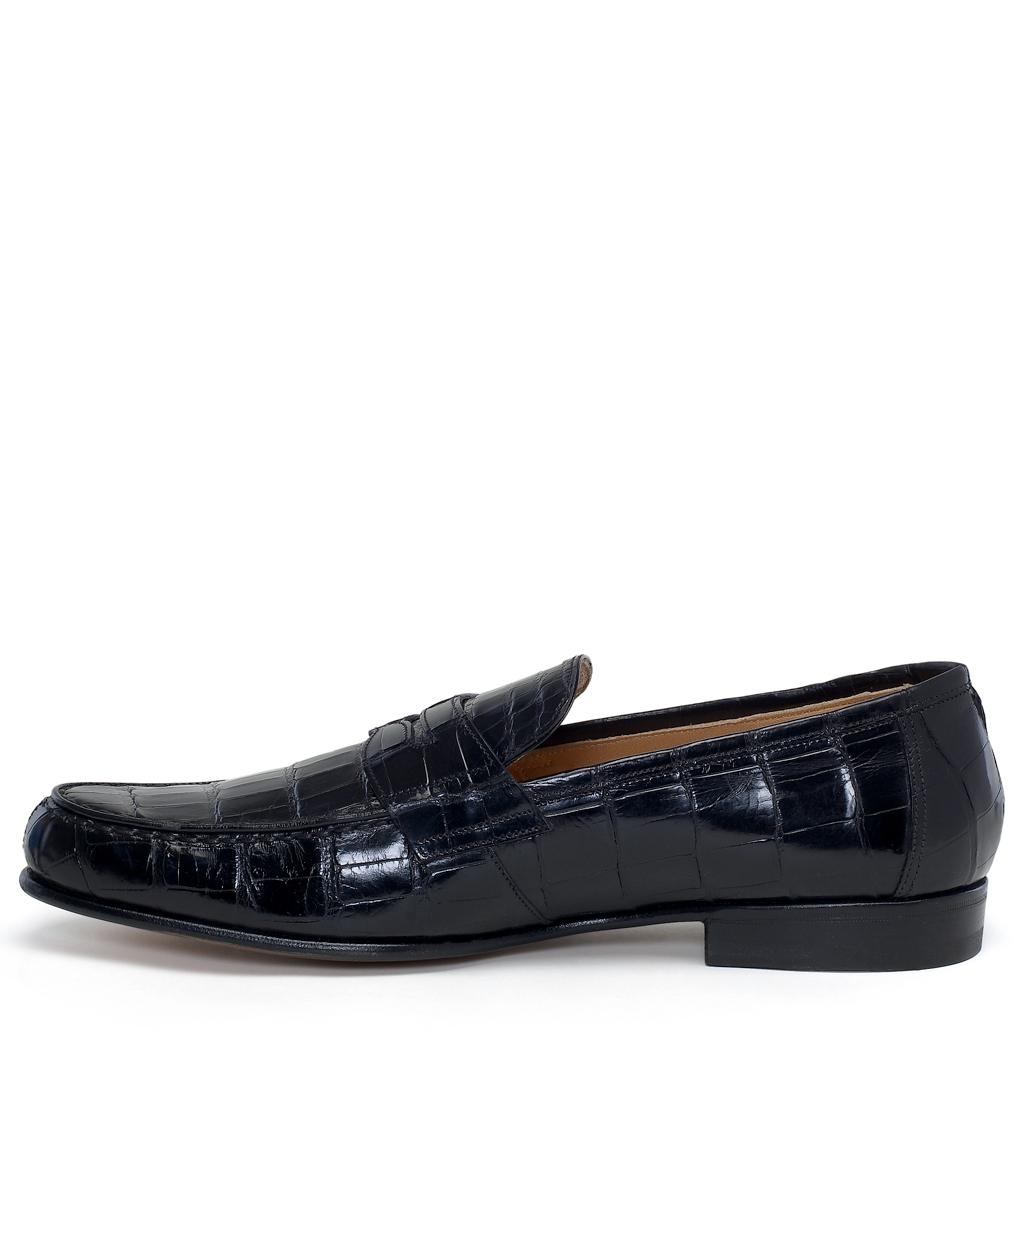 Brooks Brothers Leather Alligator Penny Loafers in Black for Men - Lyst